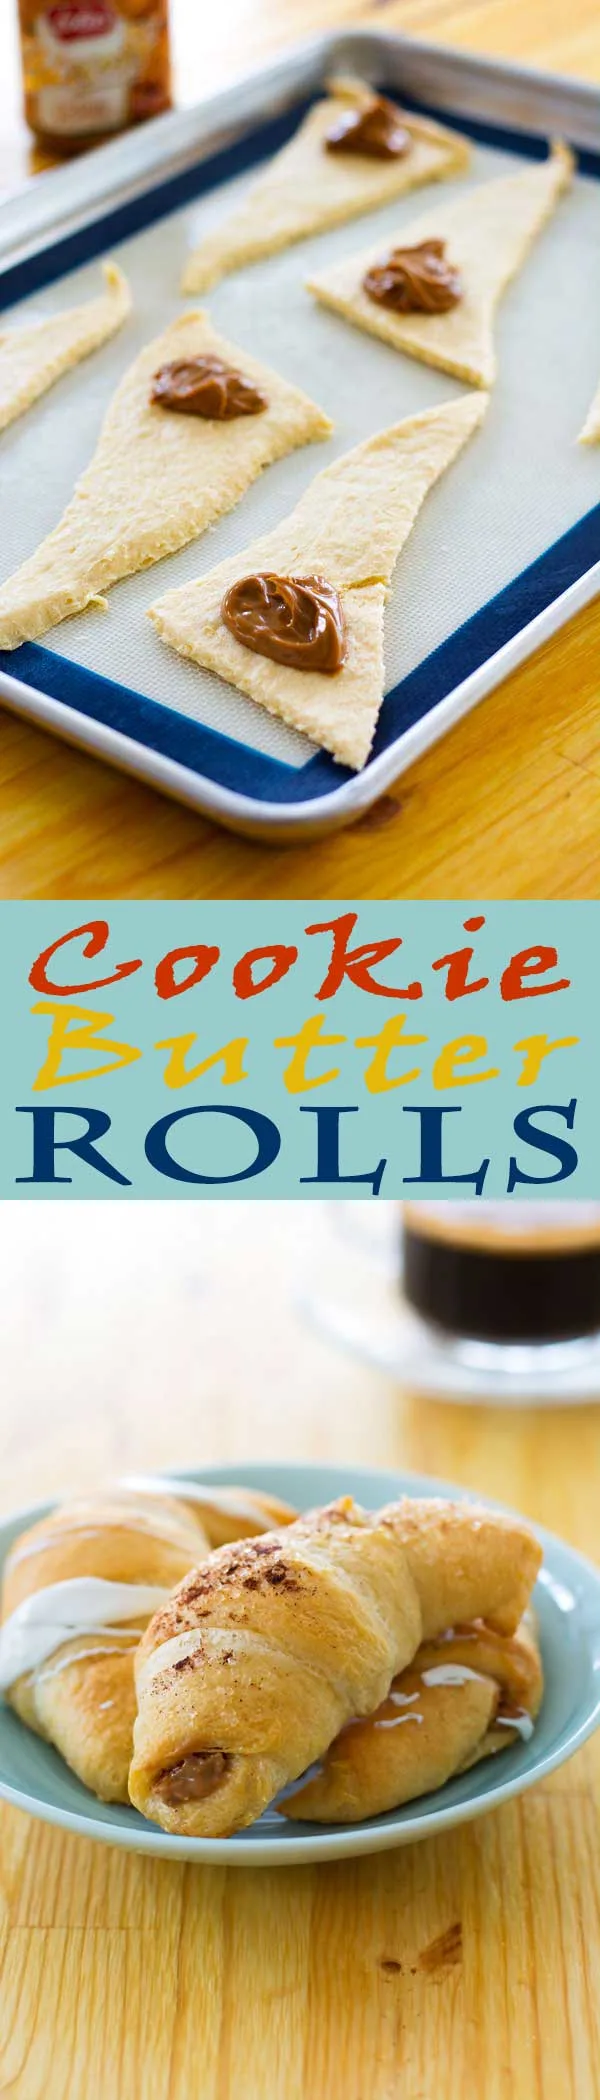 These cookie butter rolls are made with only two ingredients – crescent rolls and Biscoff cookie butter spread!